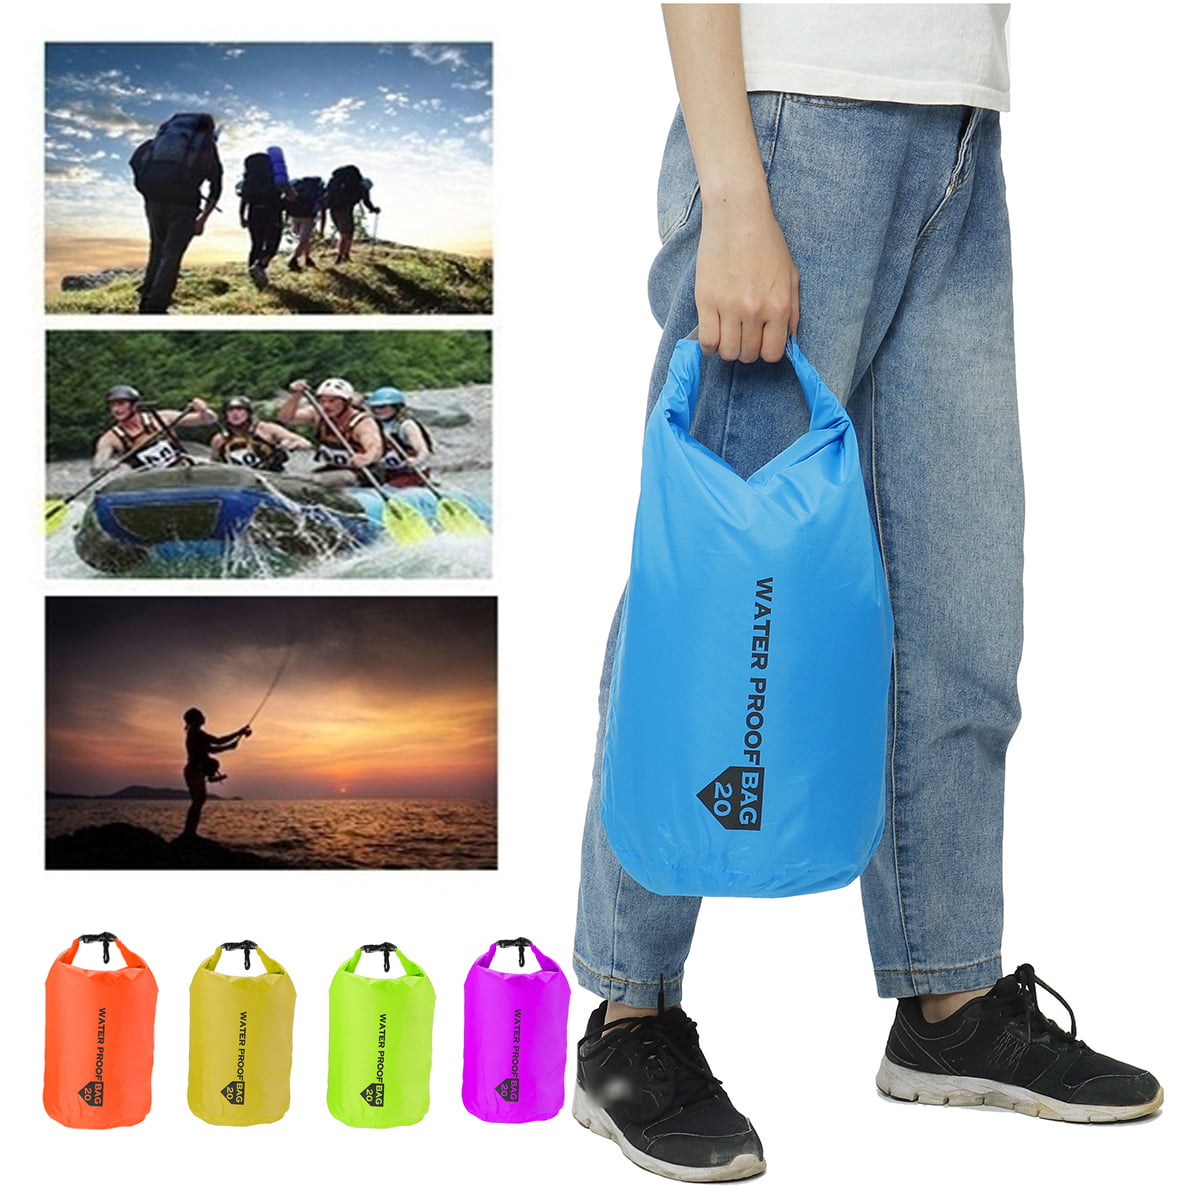 20 40 70L Waterproof Dry Bag Outdoor Travel Camping Floating Pouch Lightweight 